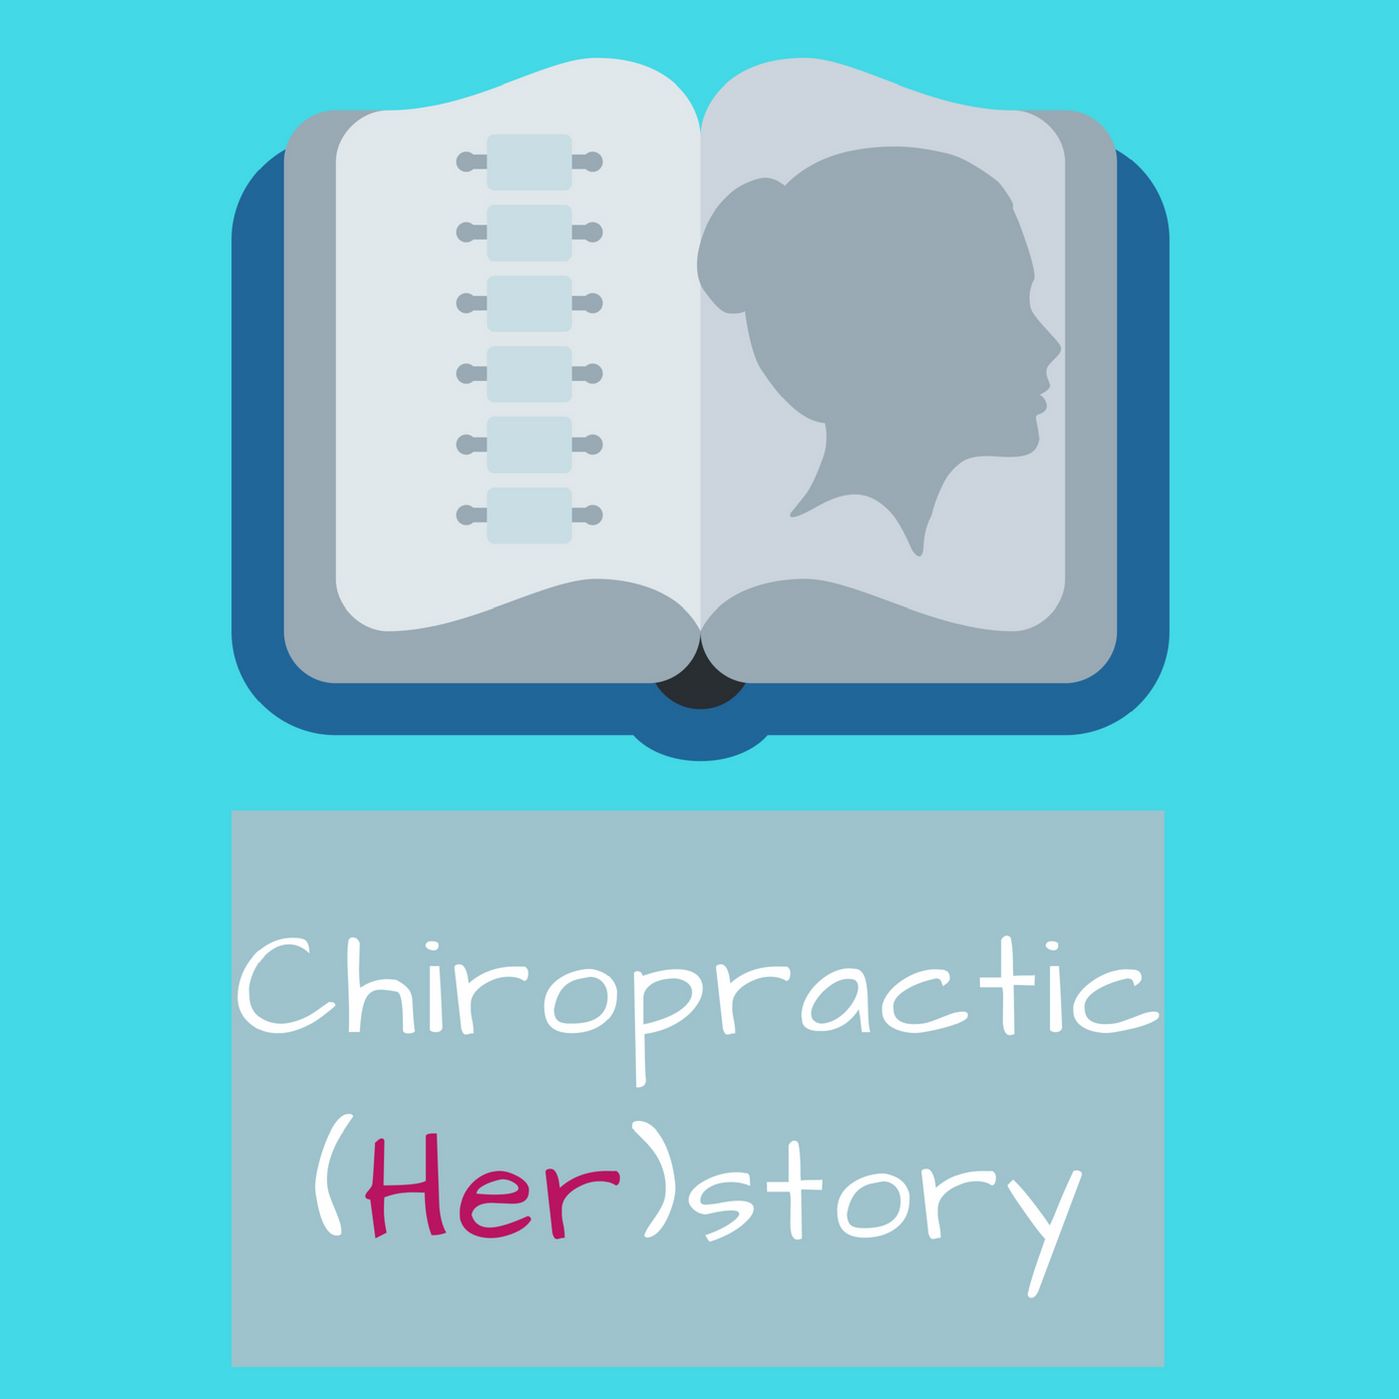 Dr. Donna Craft Godin- Chiropractic (Her)story Episode 4